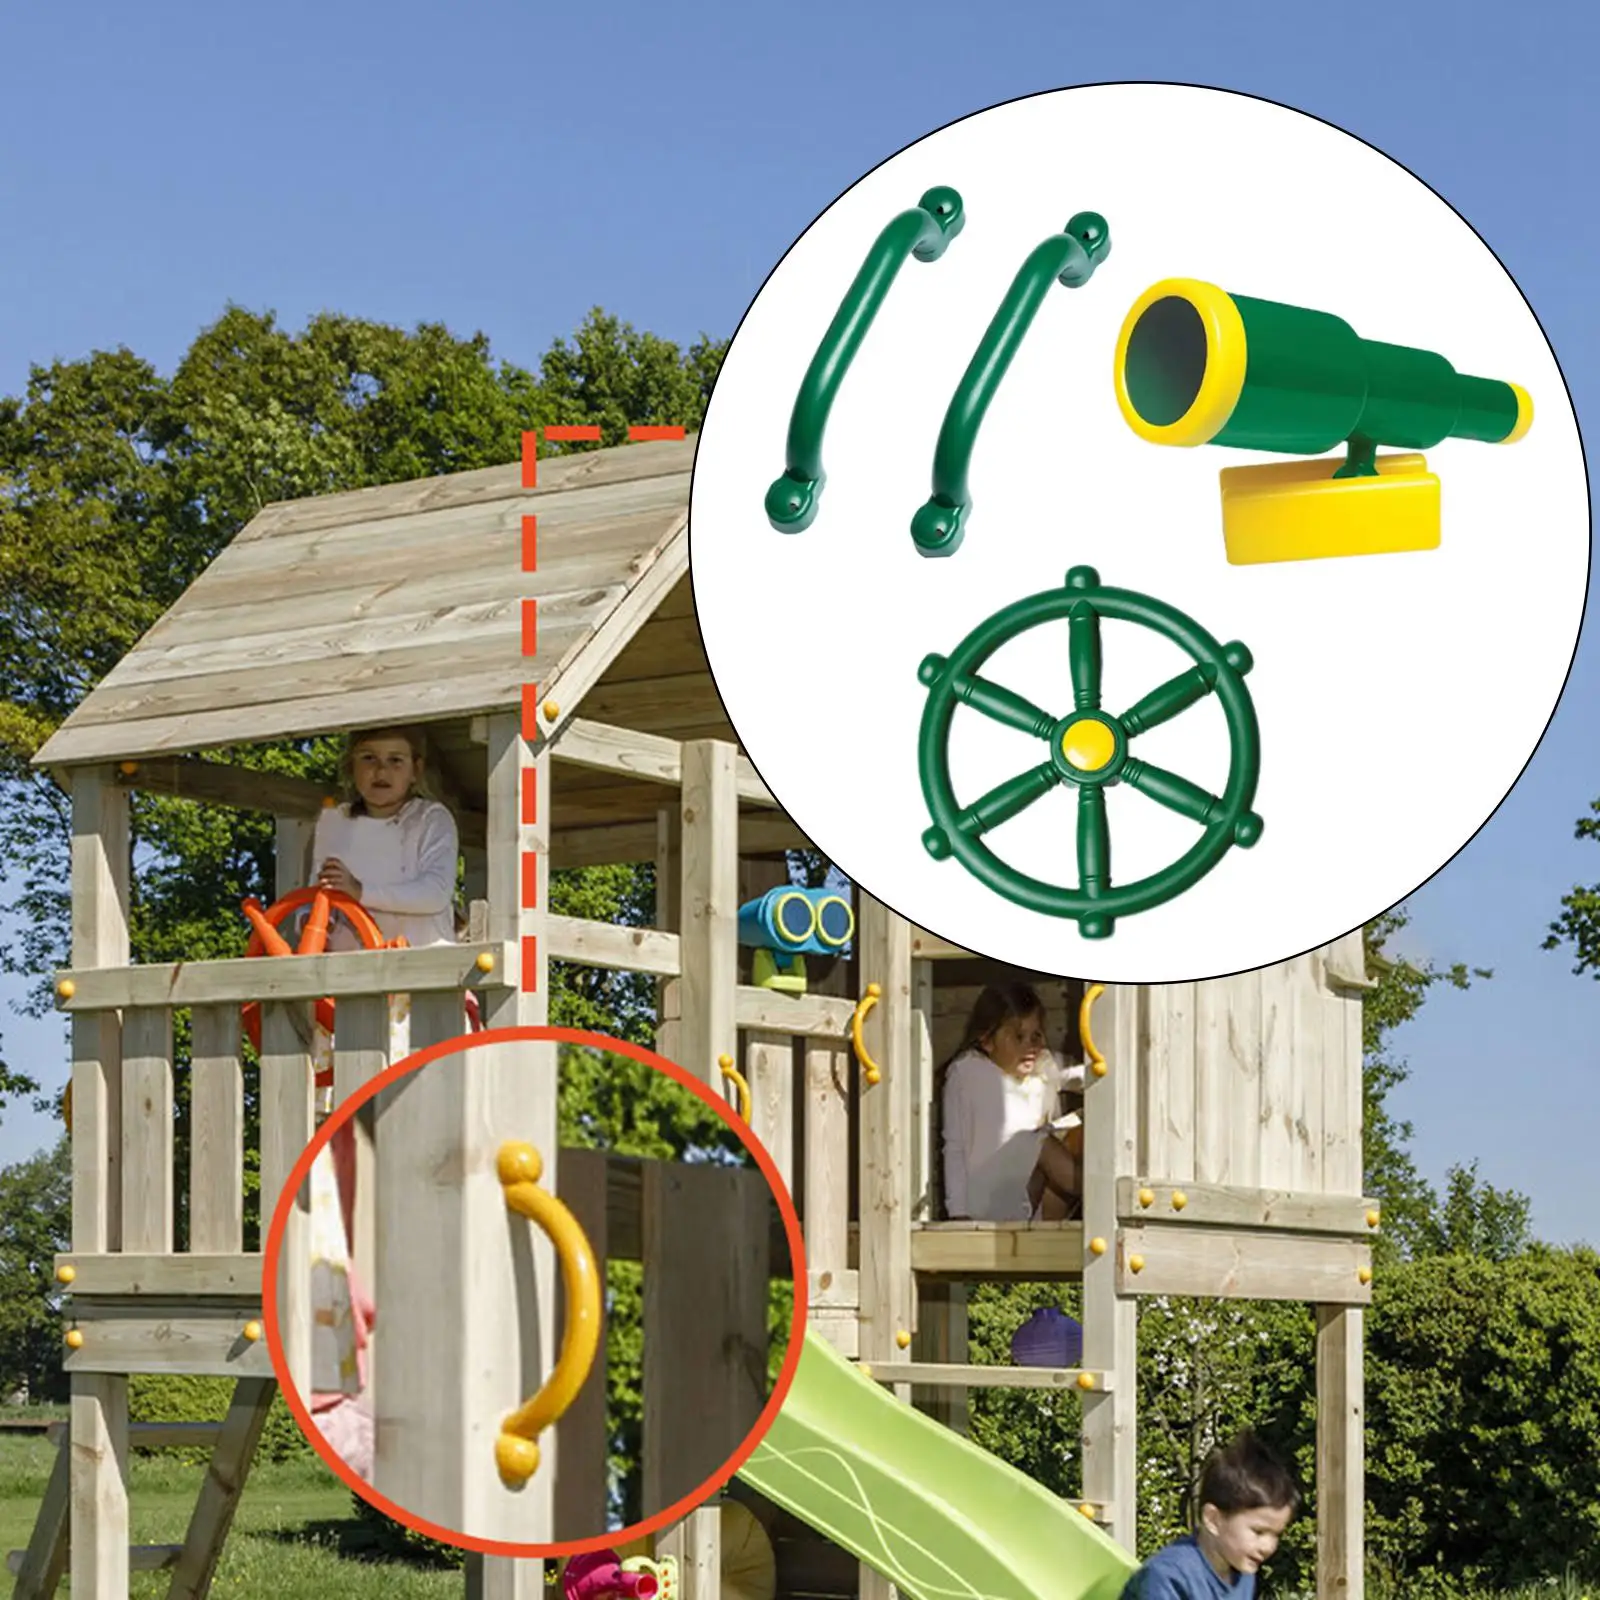 4Pcs Plastic Playground Equipment Set Swing Set Accessories for Treehouse Climbing Frame Playhouse Jungle Gym Ages 3 & Older